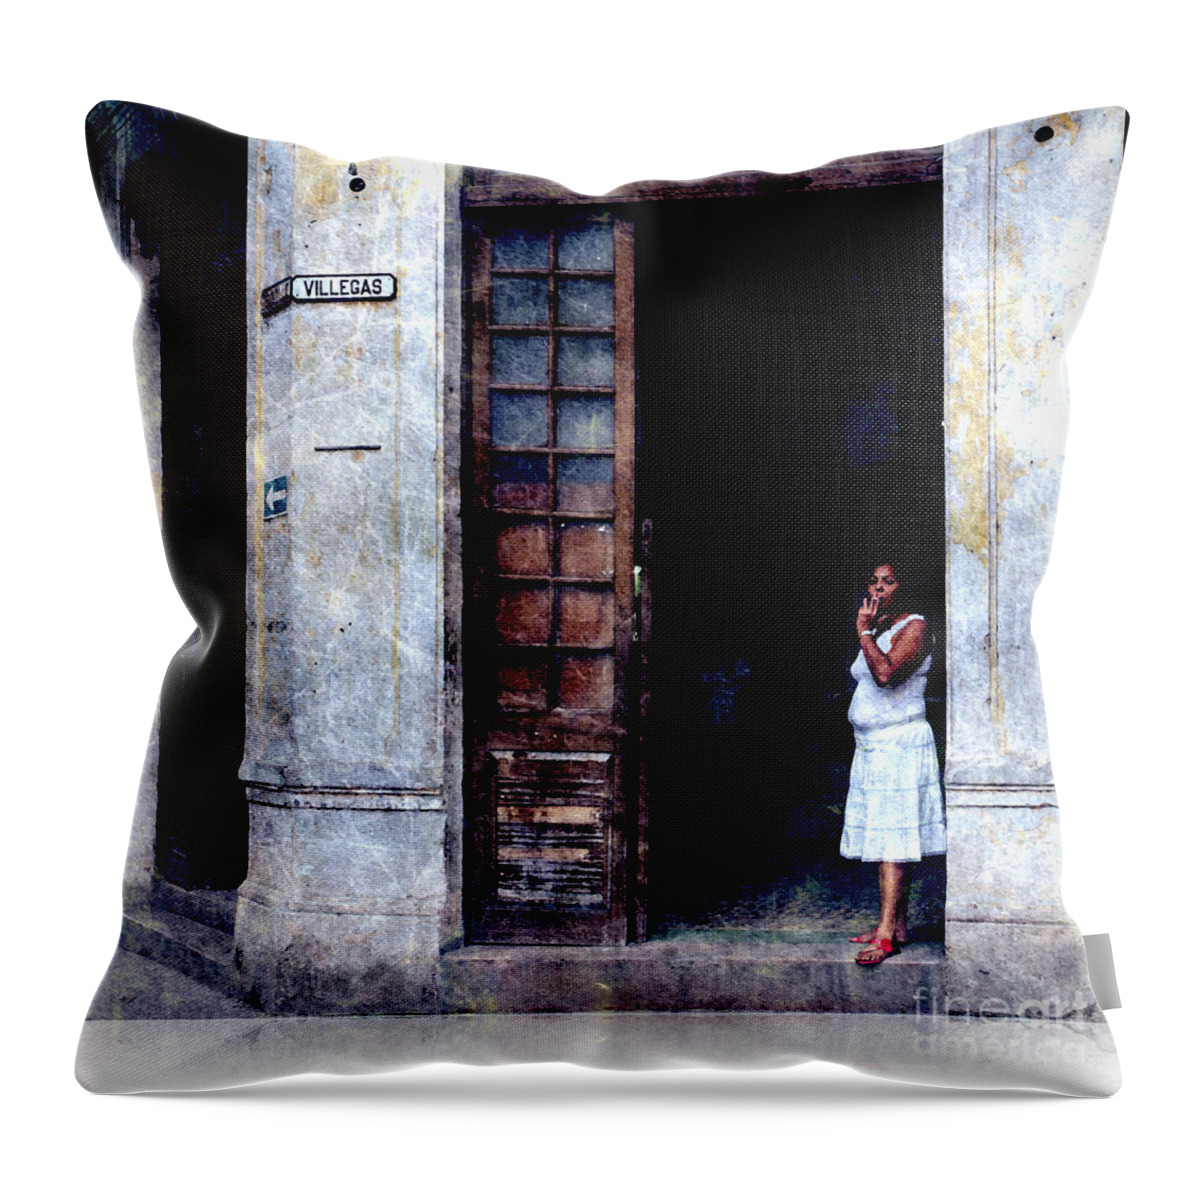 Woman Throw Pillow featuring the photograph Challenge 15 - Cuba by Rory Siegel